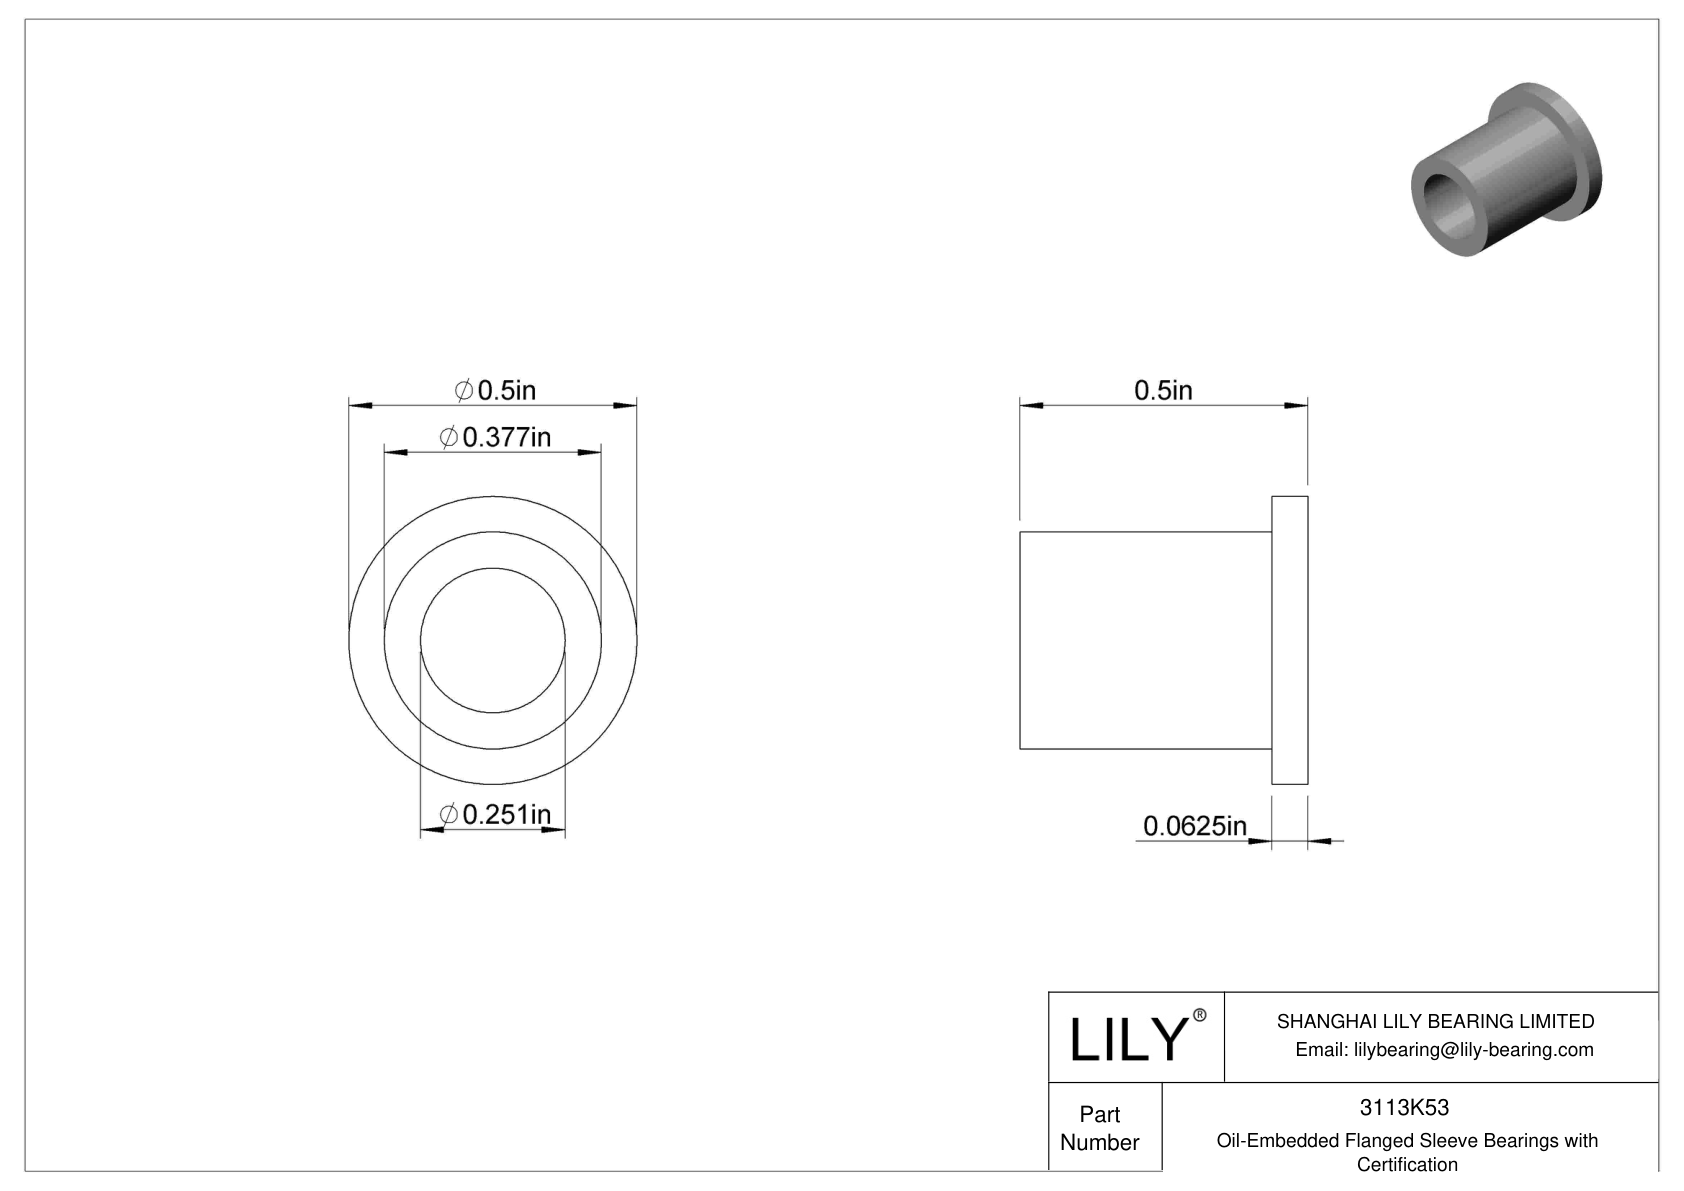 DBBDKFD Oil-Embedded Flanged Sleeve Bearings with Certification cad drawing